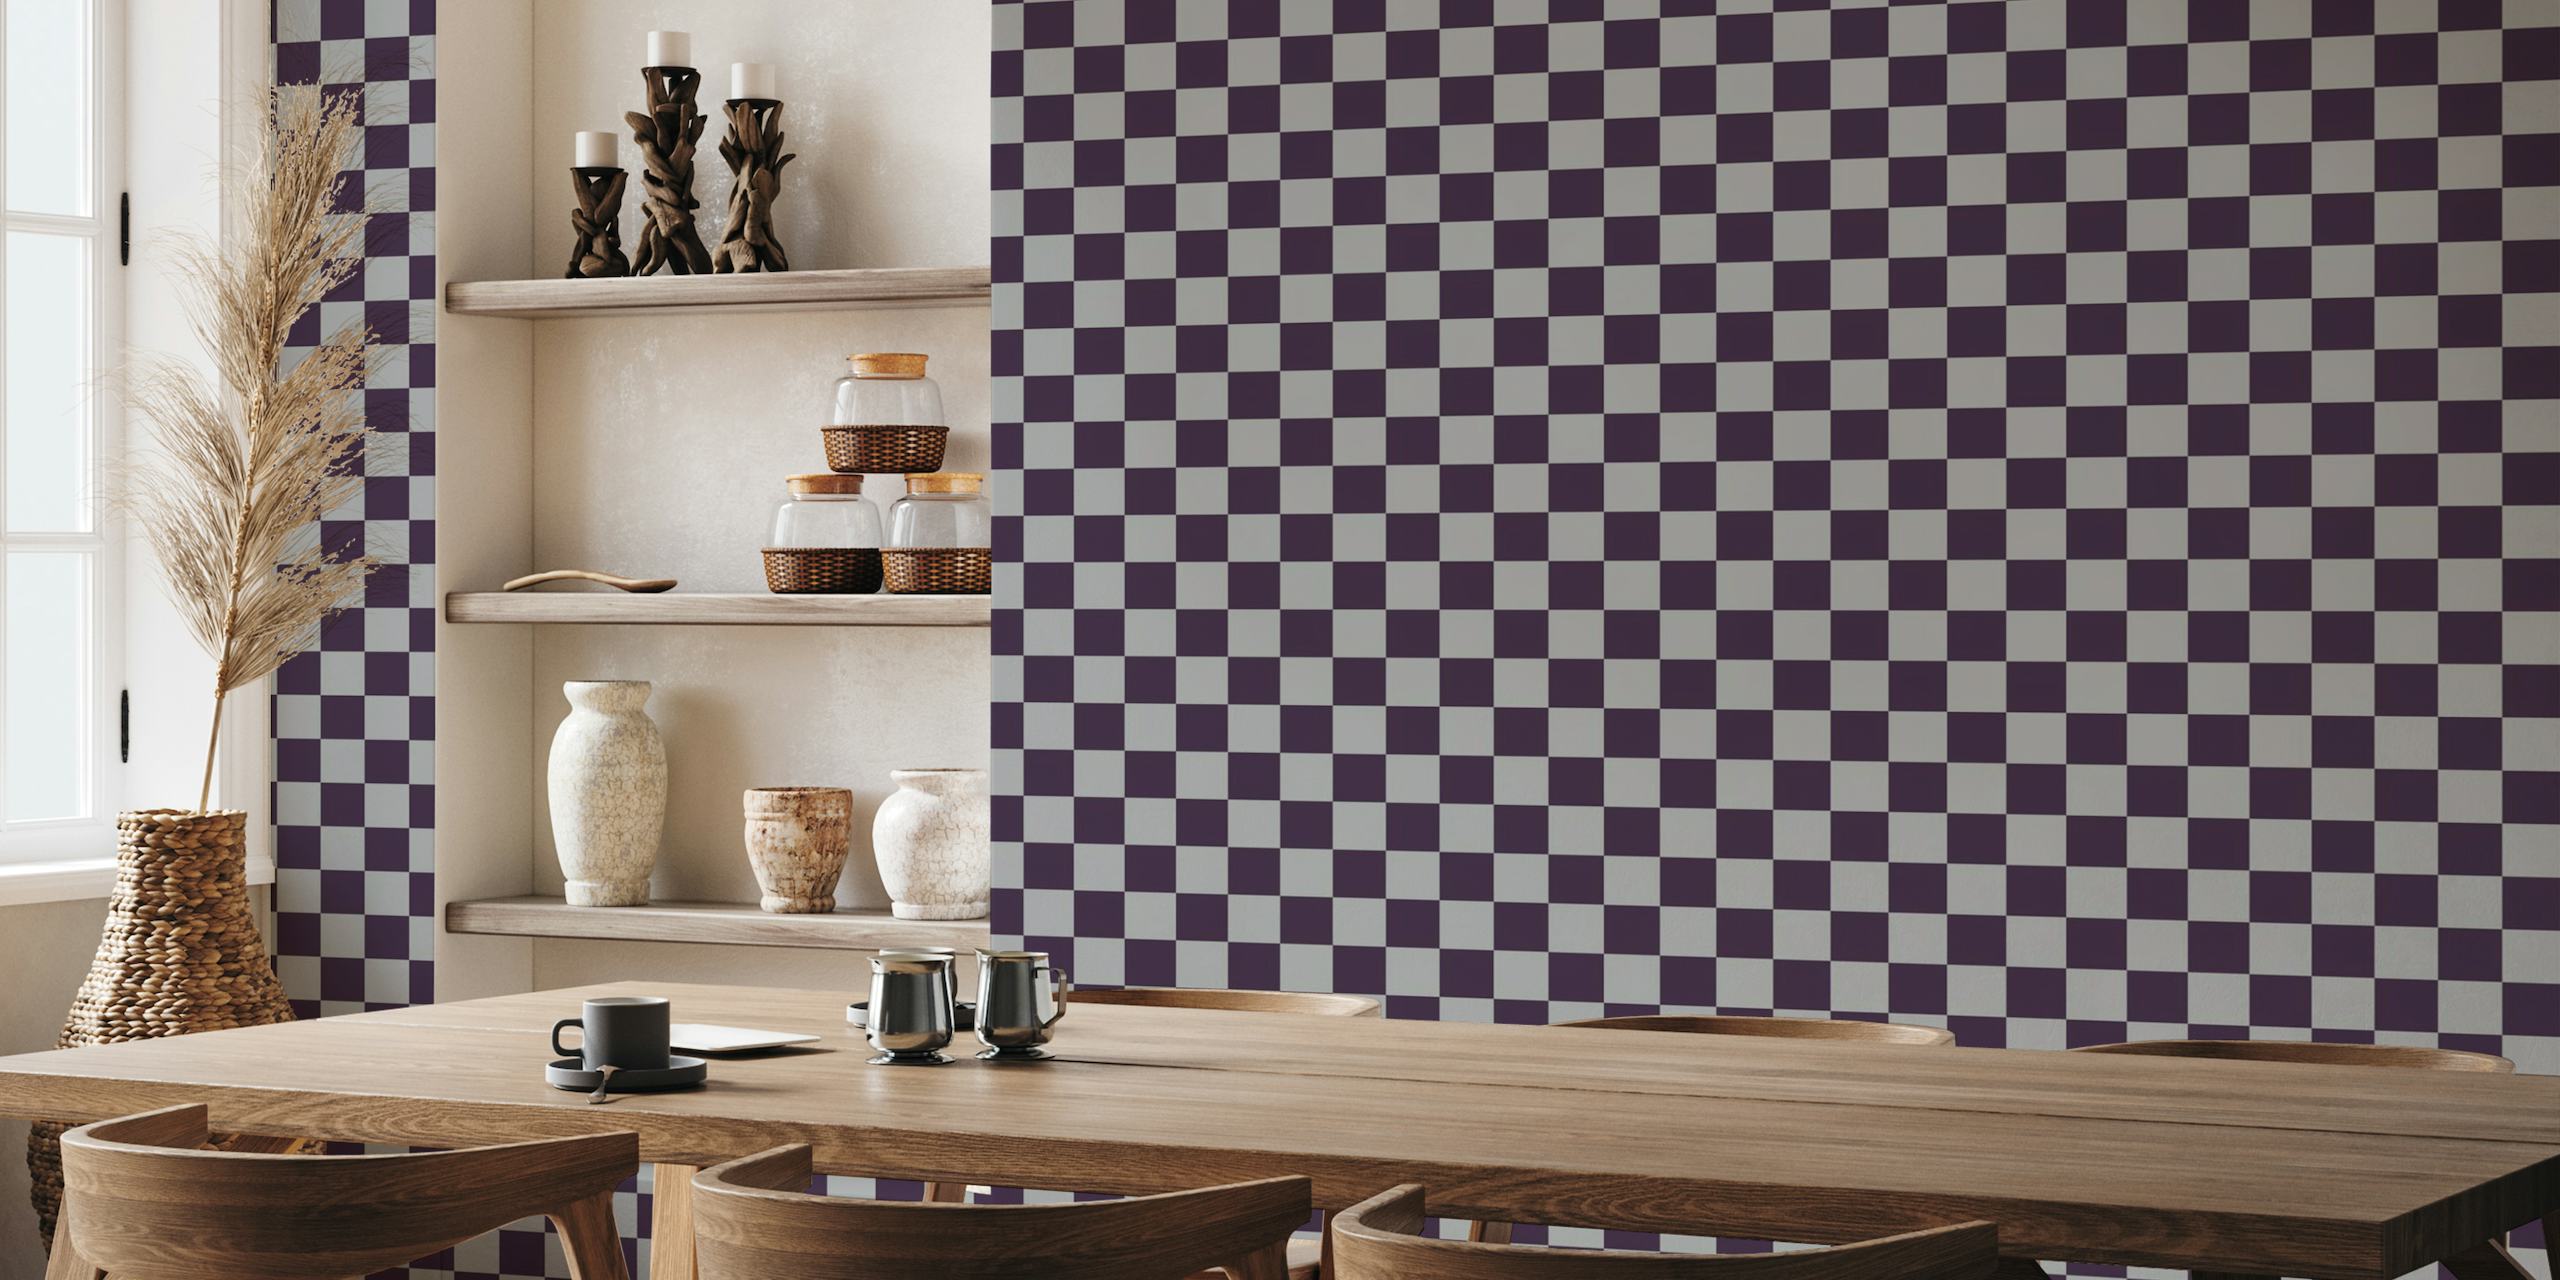 Checkerboard pattern wall mural in deep purple and gray